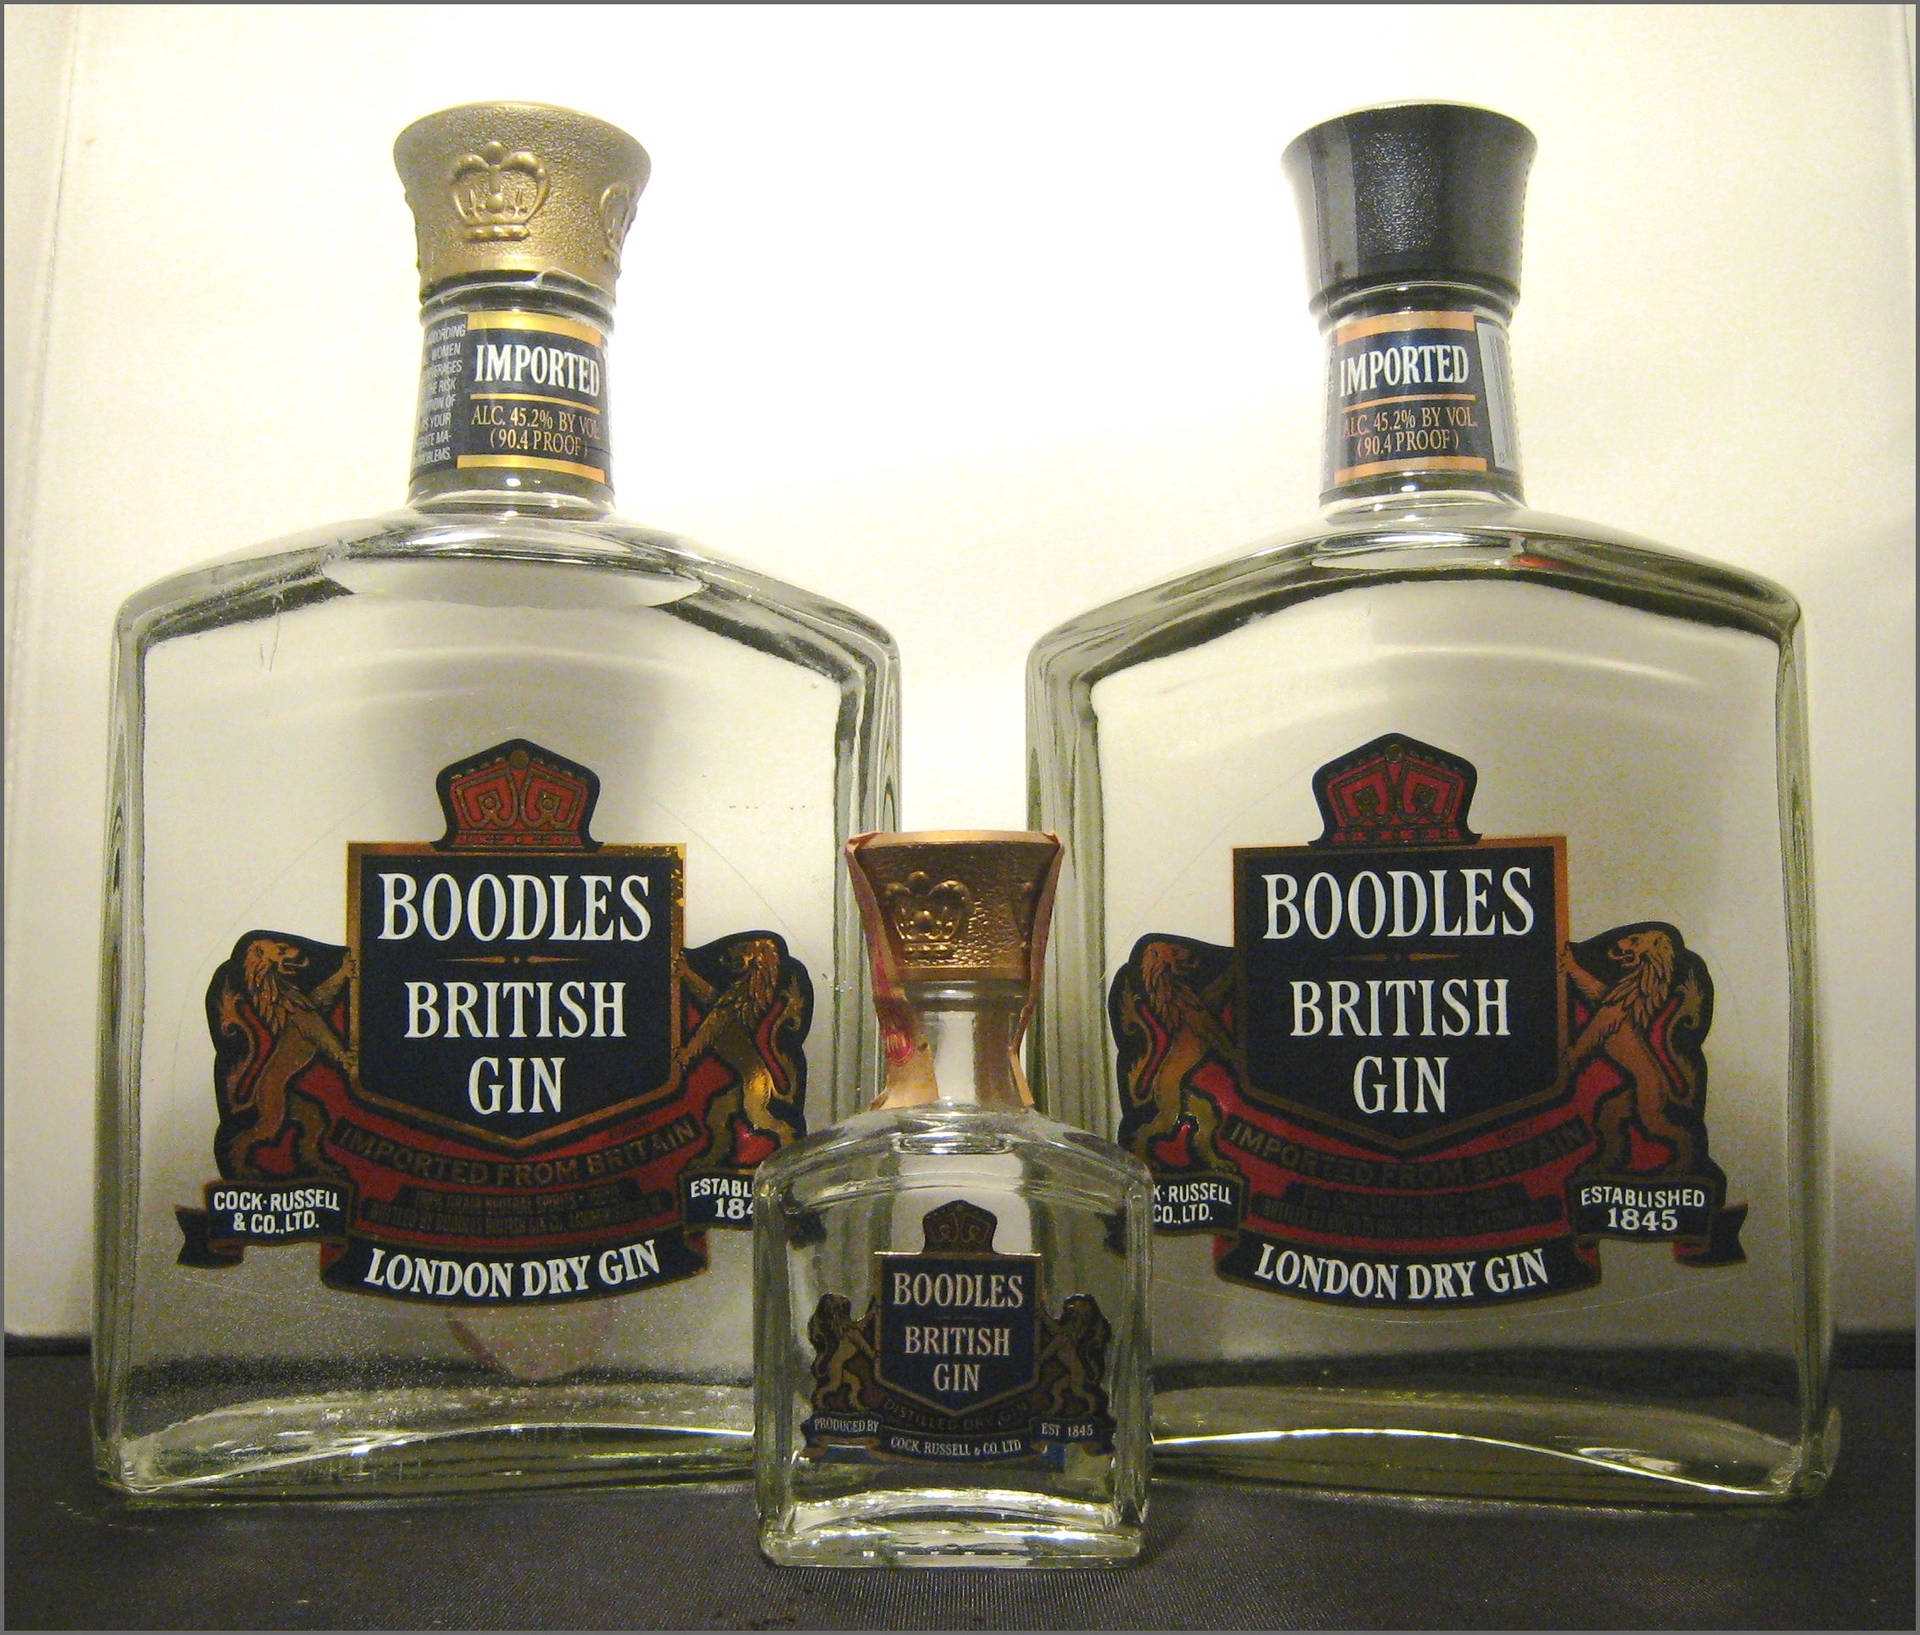 Classic Full-size With Miniature Boodles Gin Bottles Wallpaper